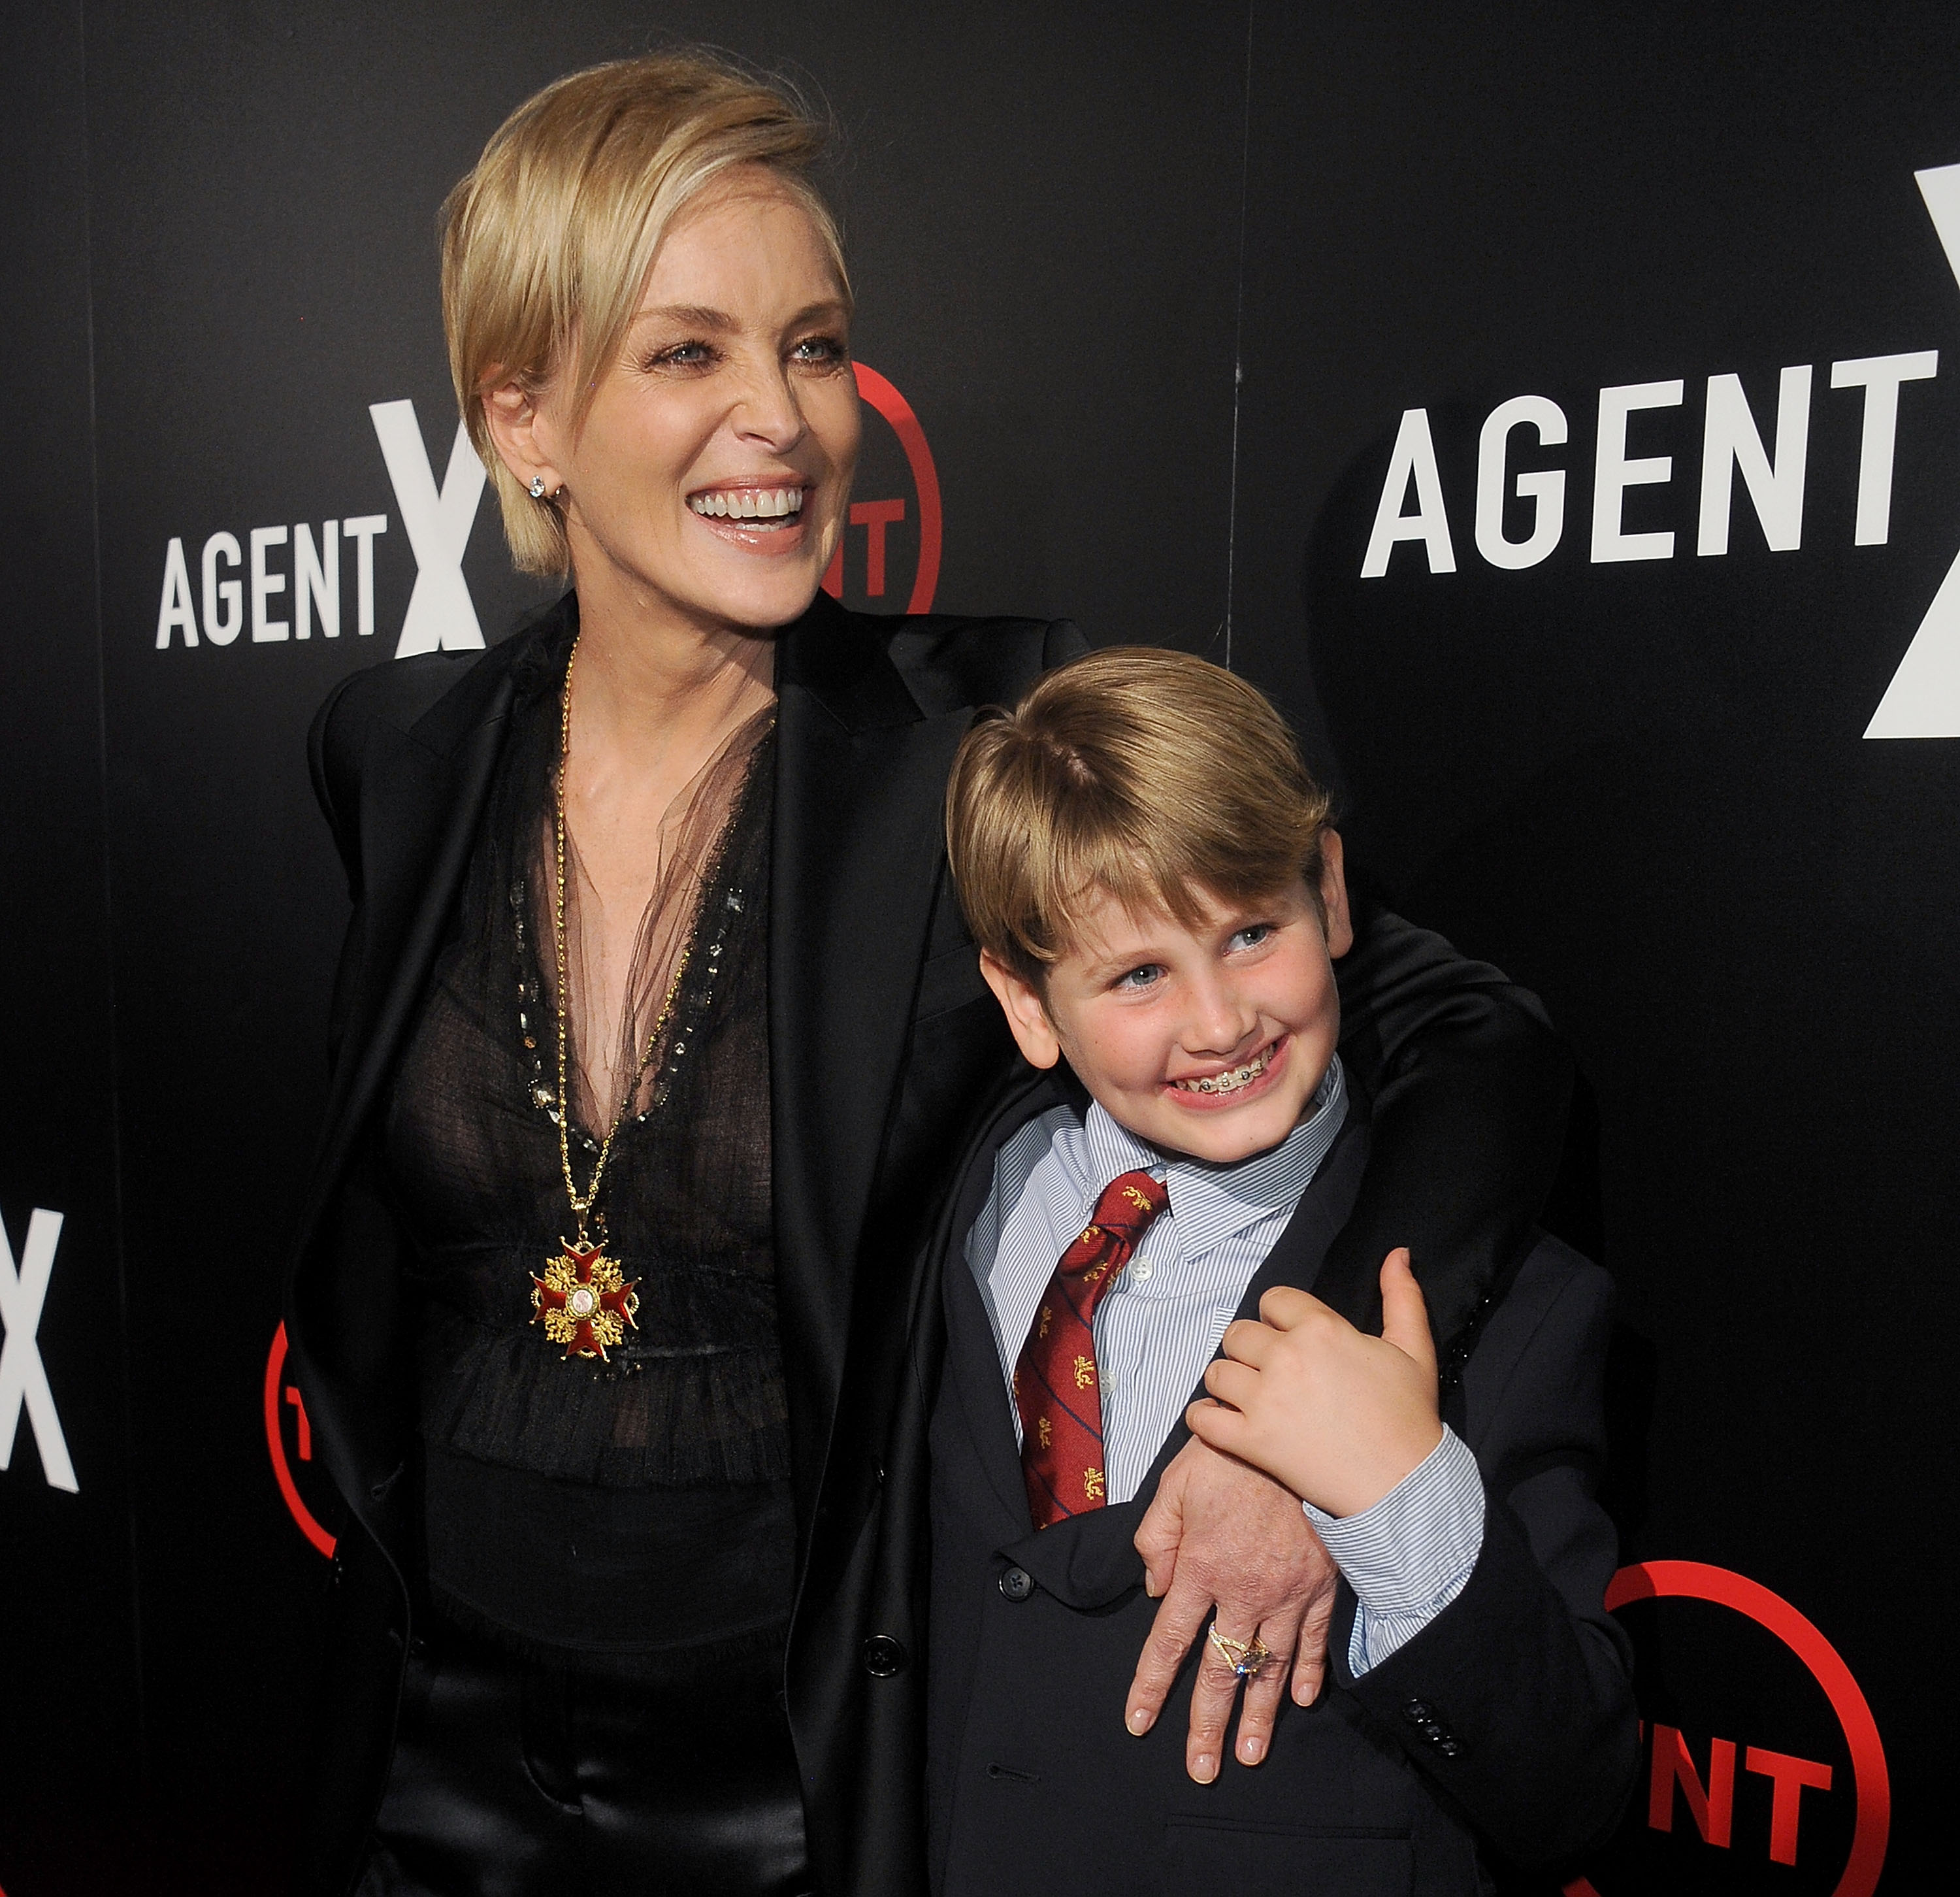 Sharon Stone and Laird on the red carpet